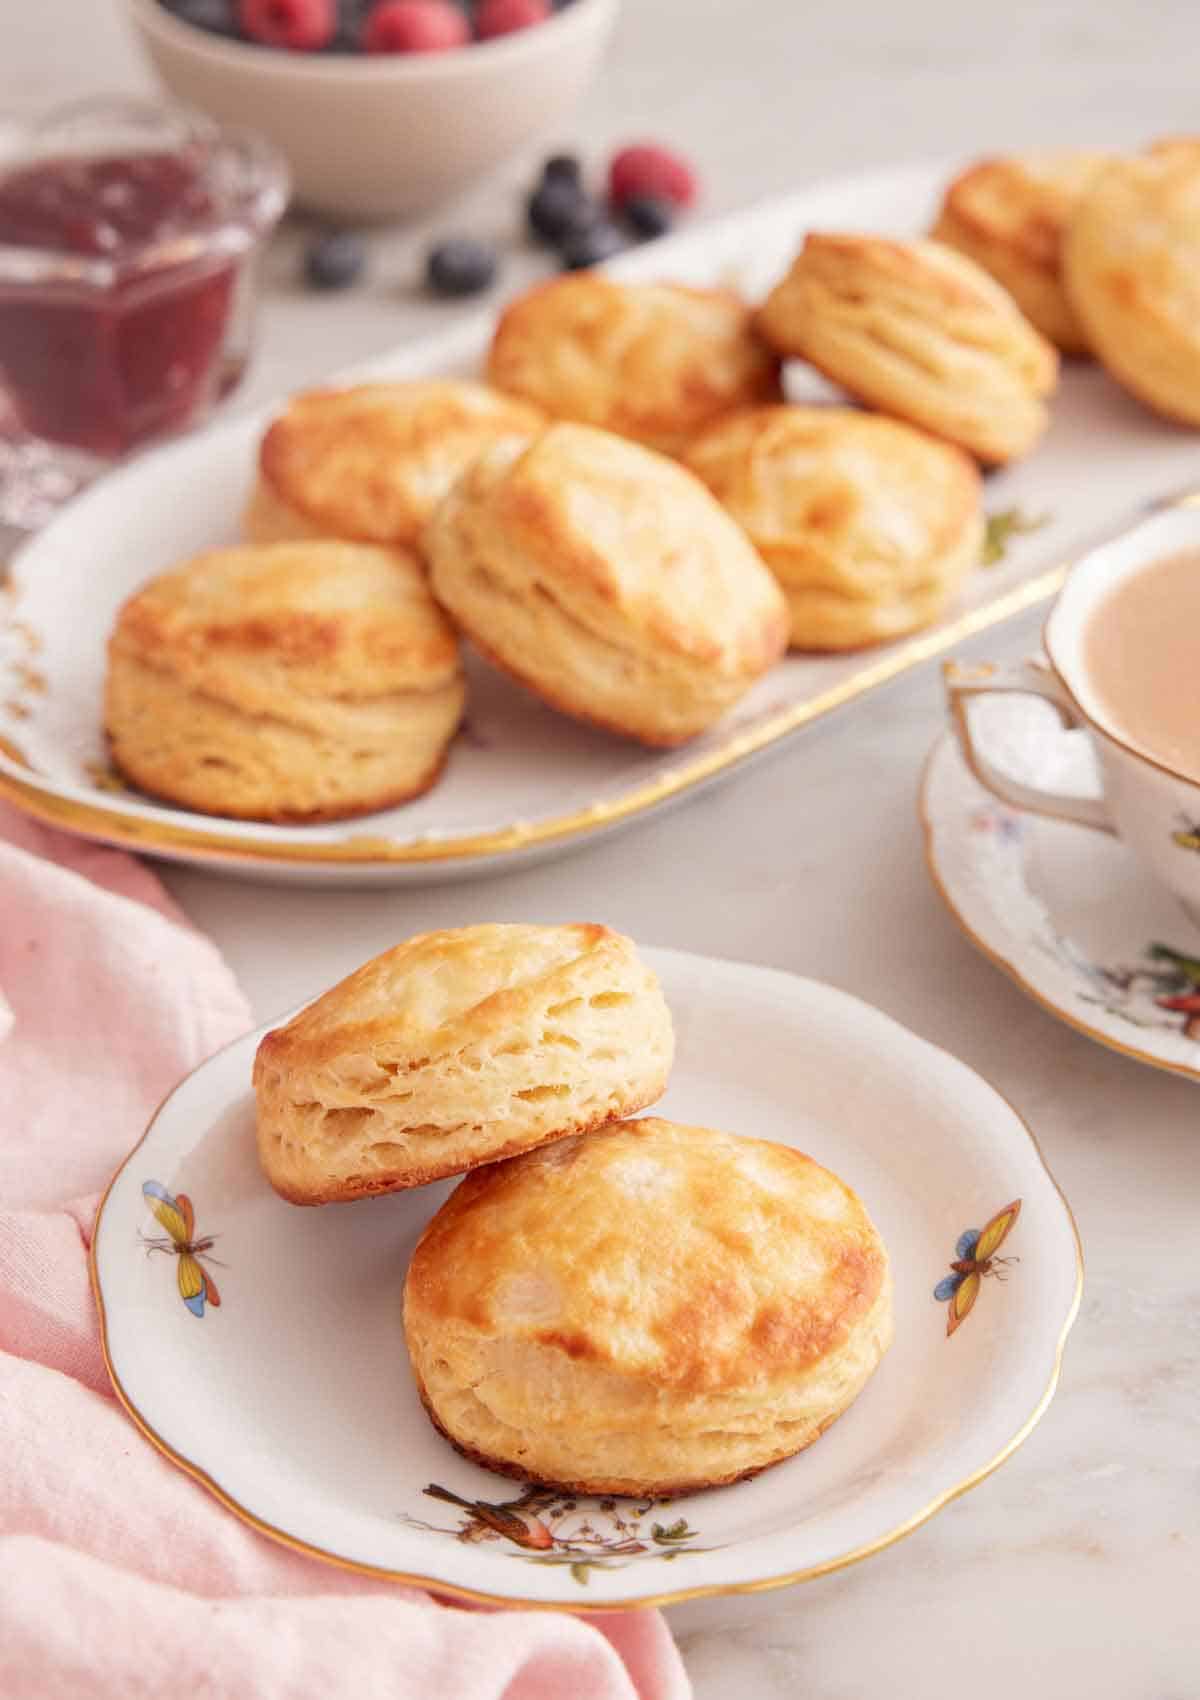 A plate with two buttermilk biscuits with a platter with more in the background along with a cup of coffee.